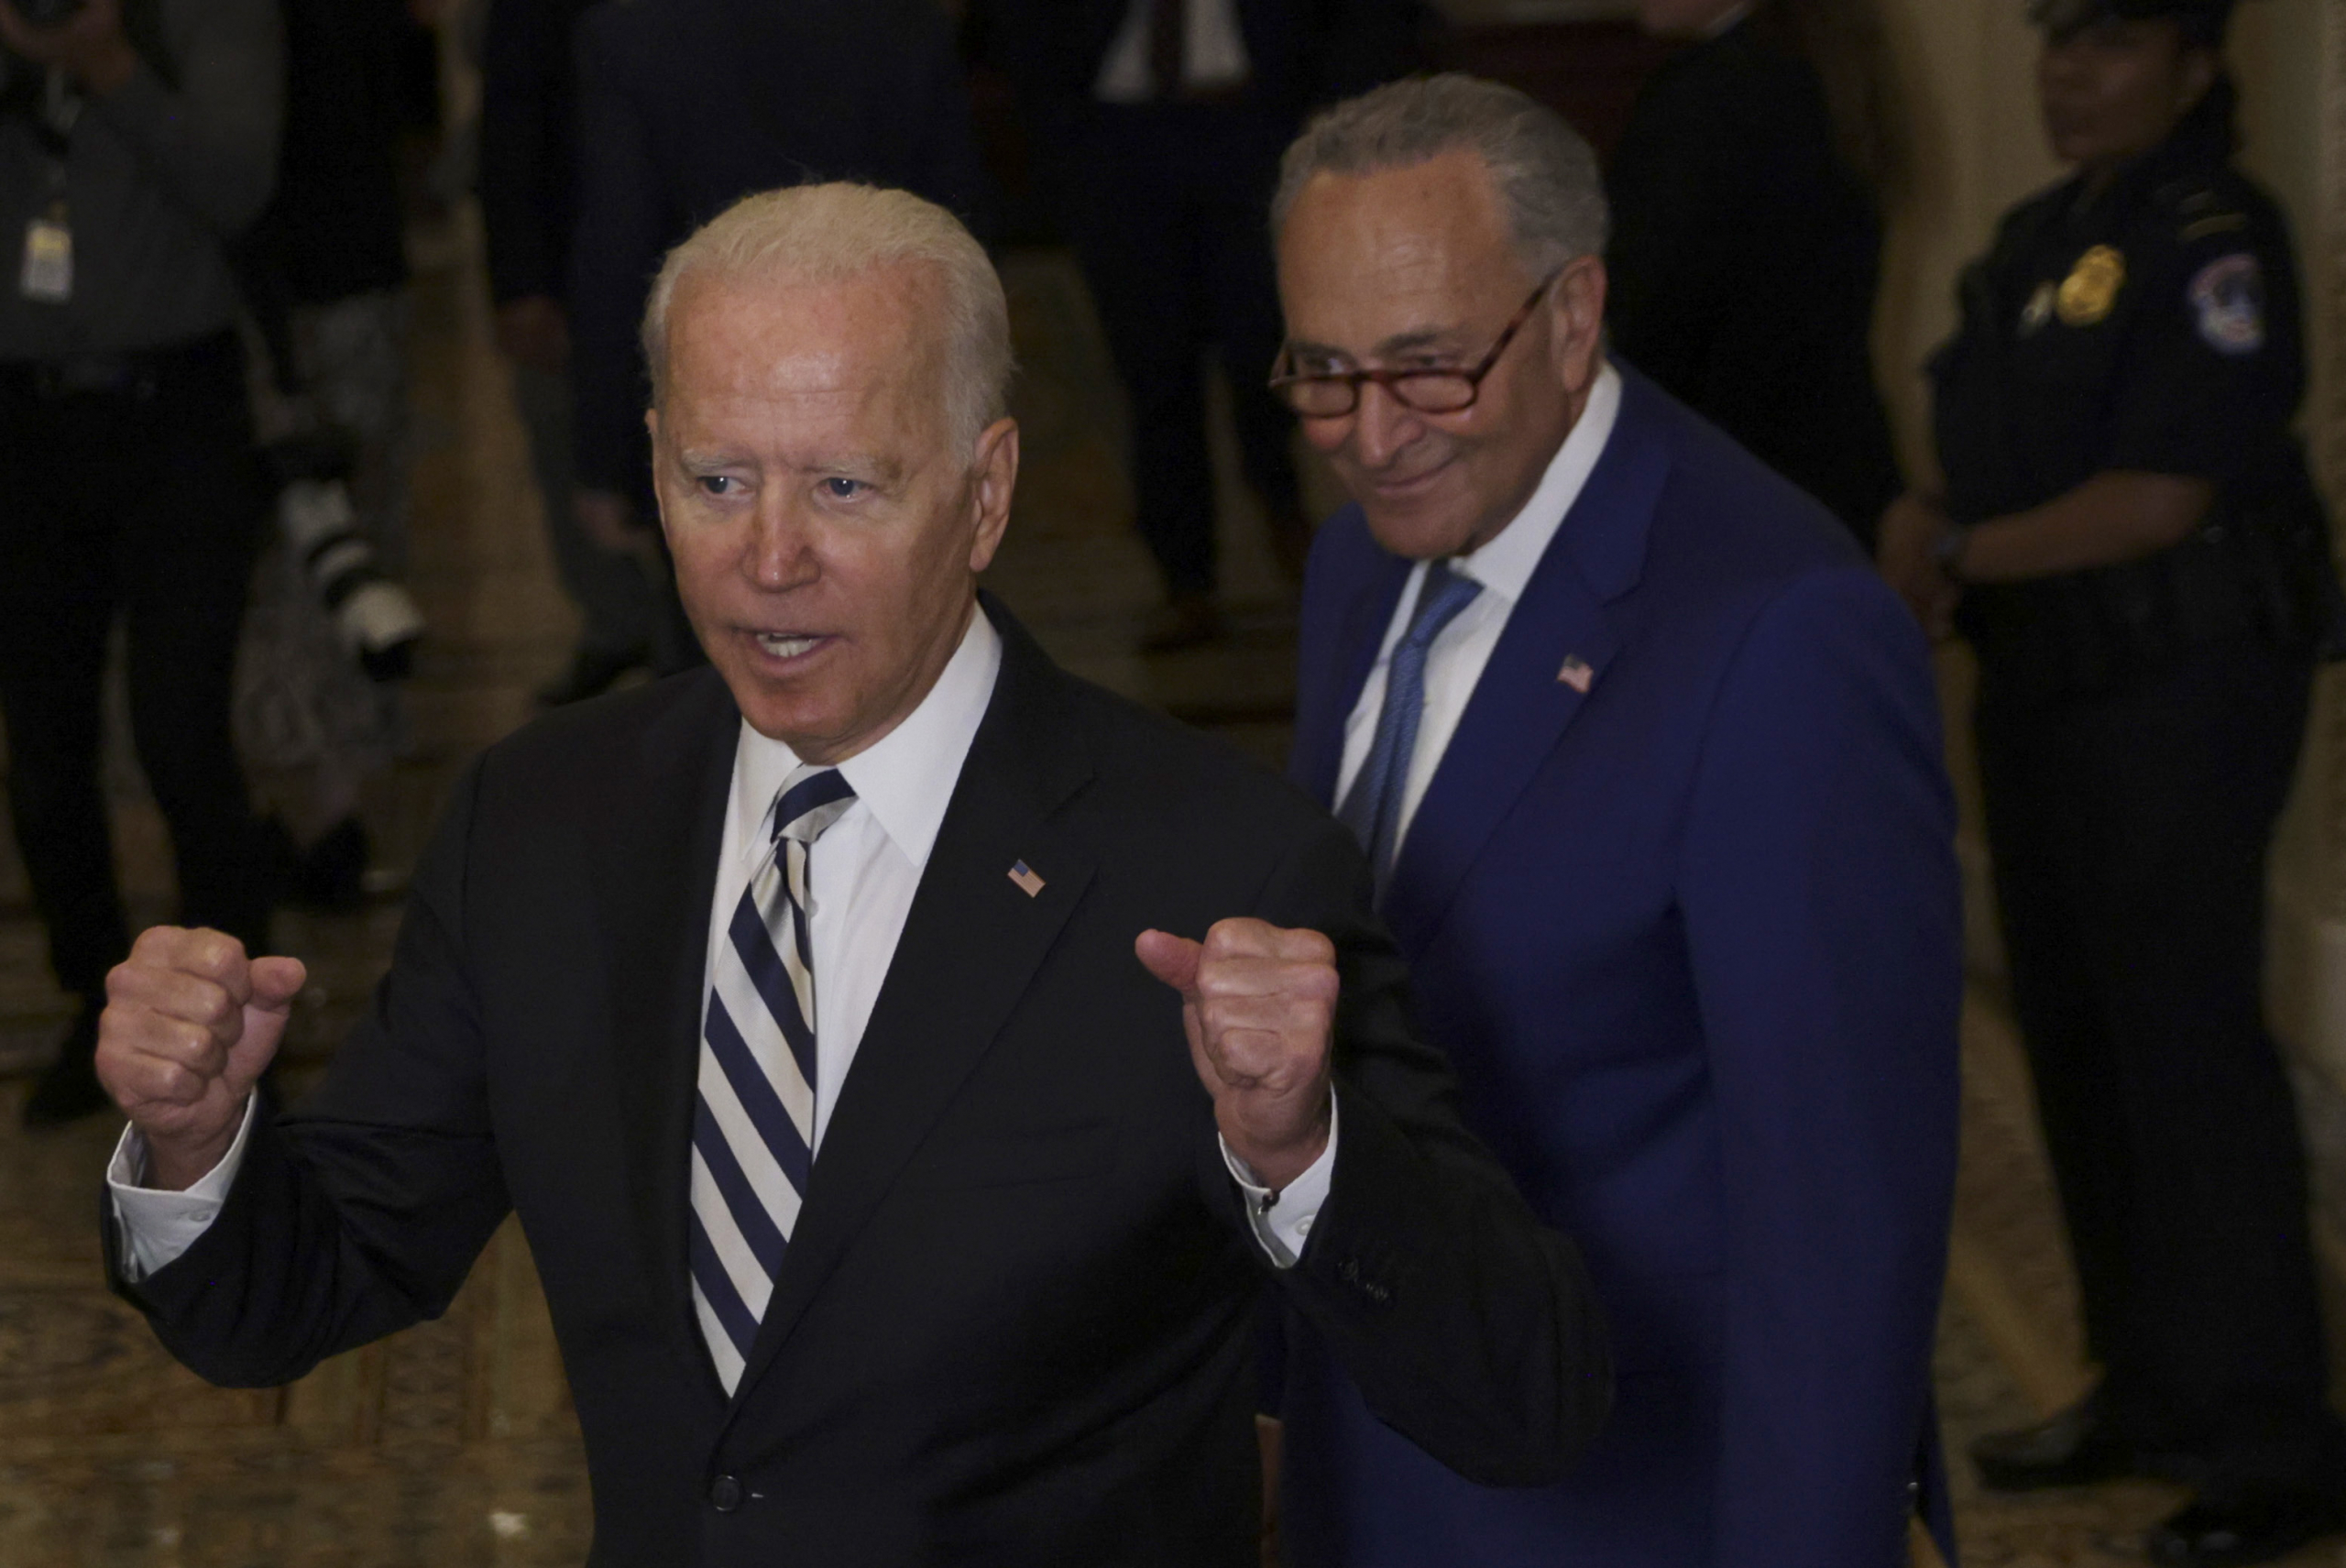 Is Biden Ready to Scrap the Filibuster?